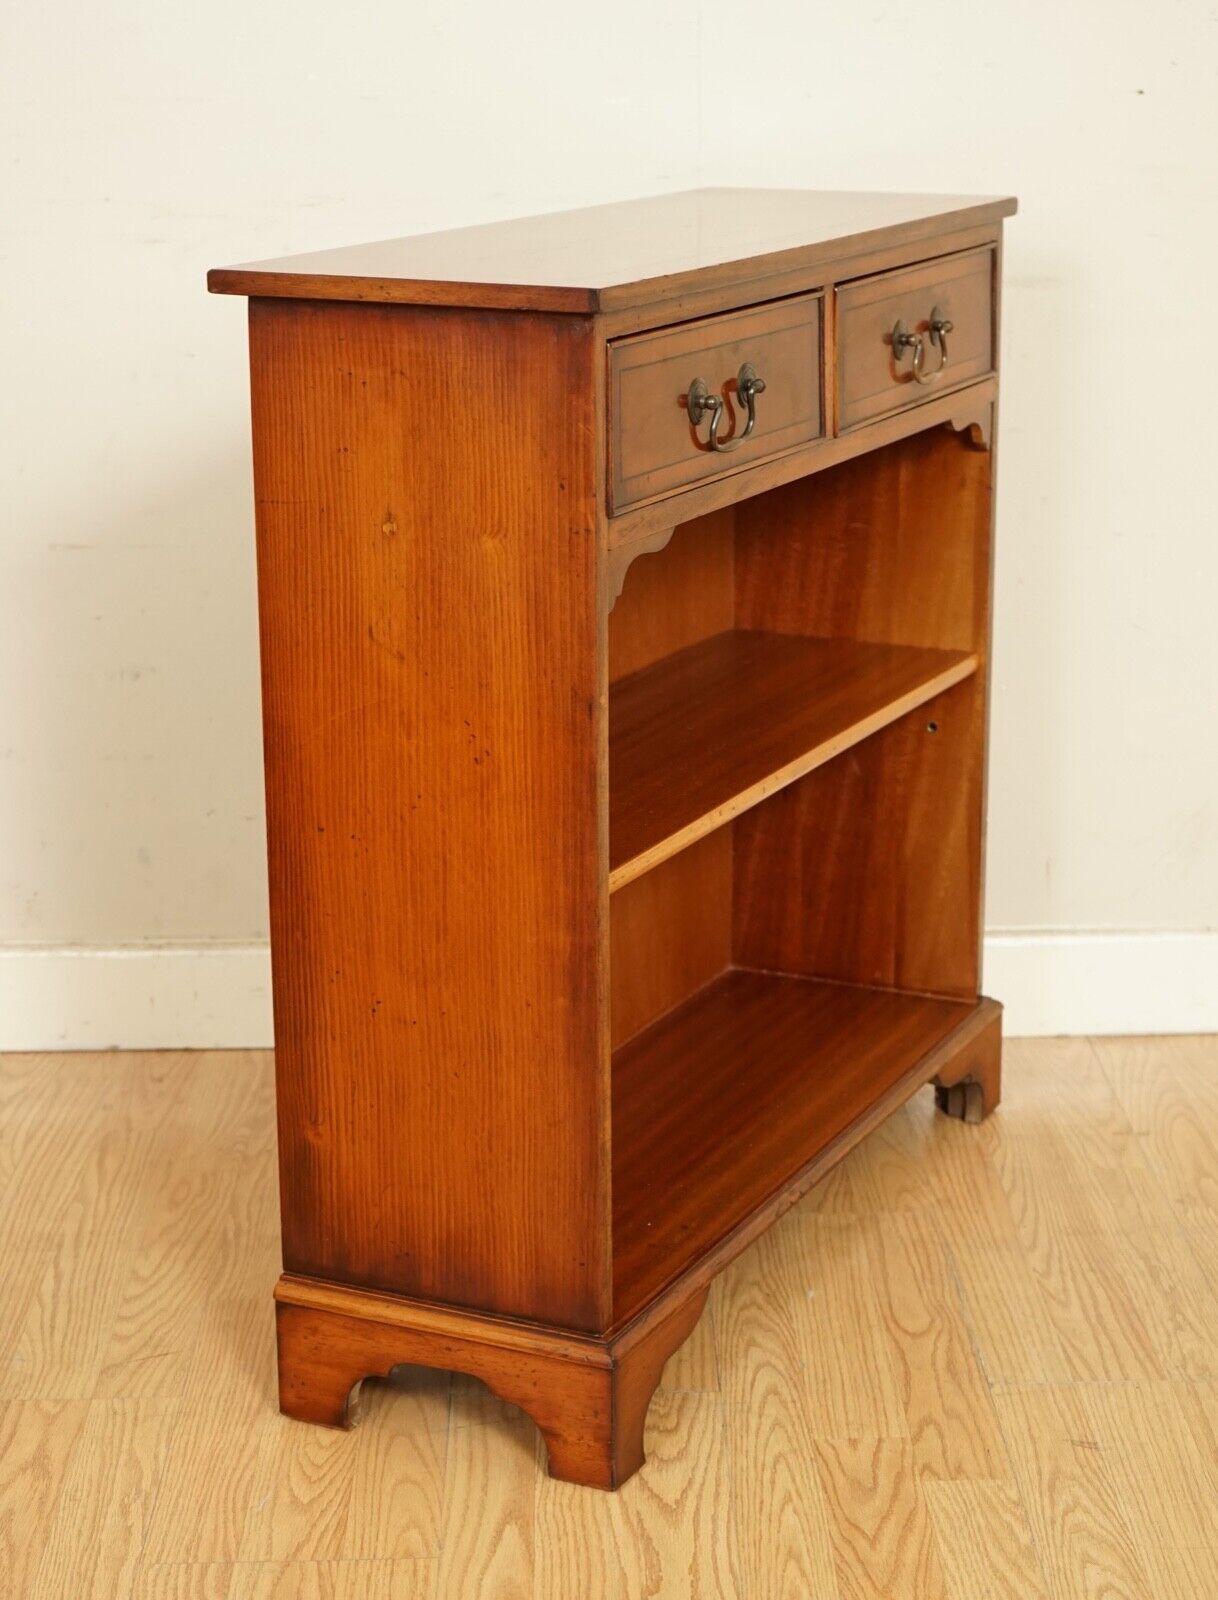 VINTAGE YEW WOOD DWARF OPEN LIBARY BOOKCASE CABINET